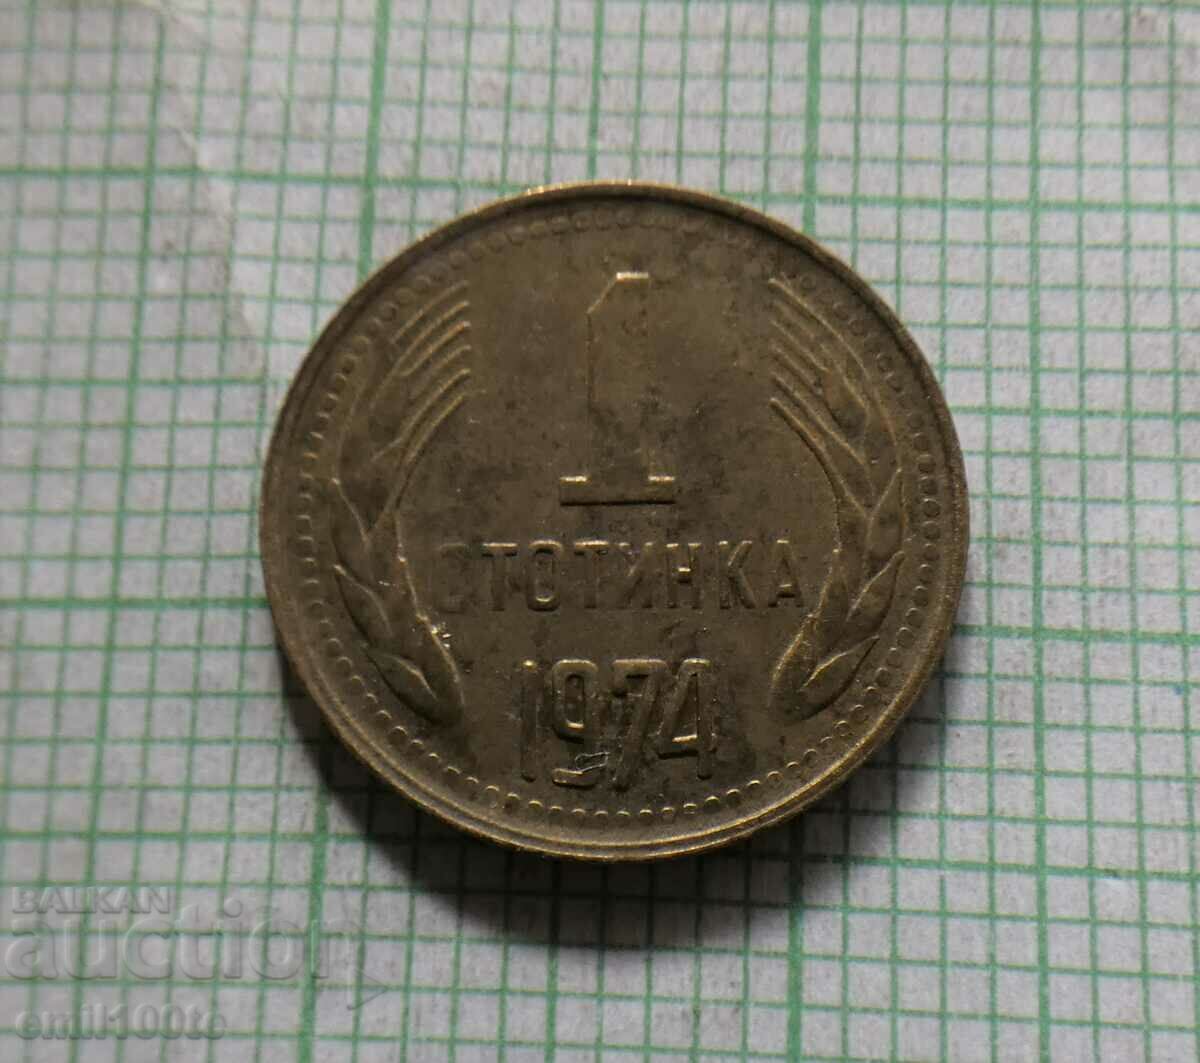 1 penny 1974 with missing letters